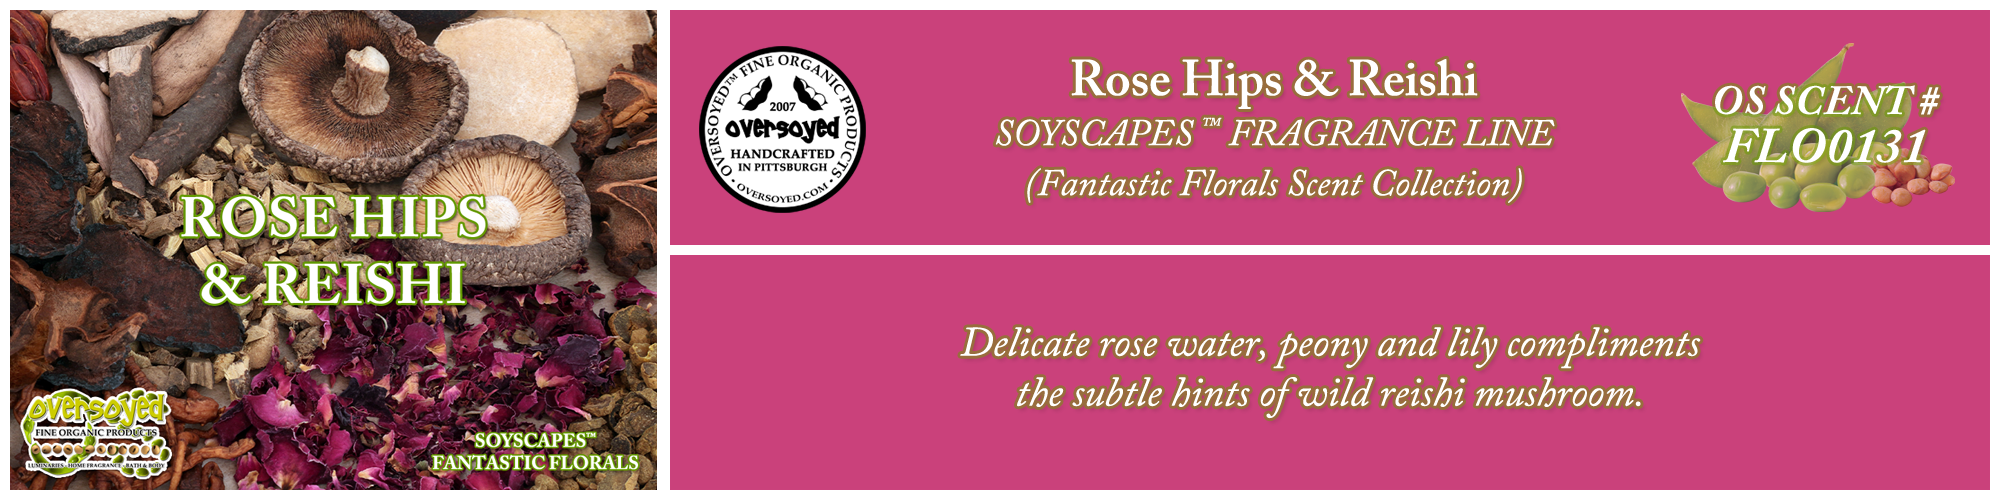 Rose Hips & Reishi Handcrafted Products Collection